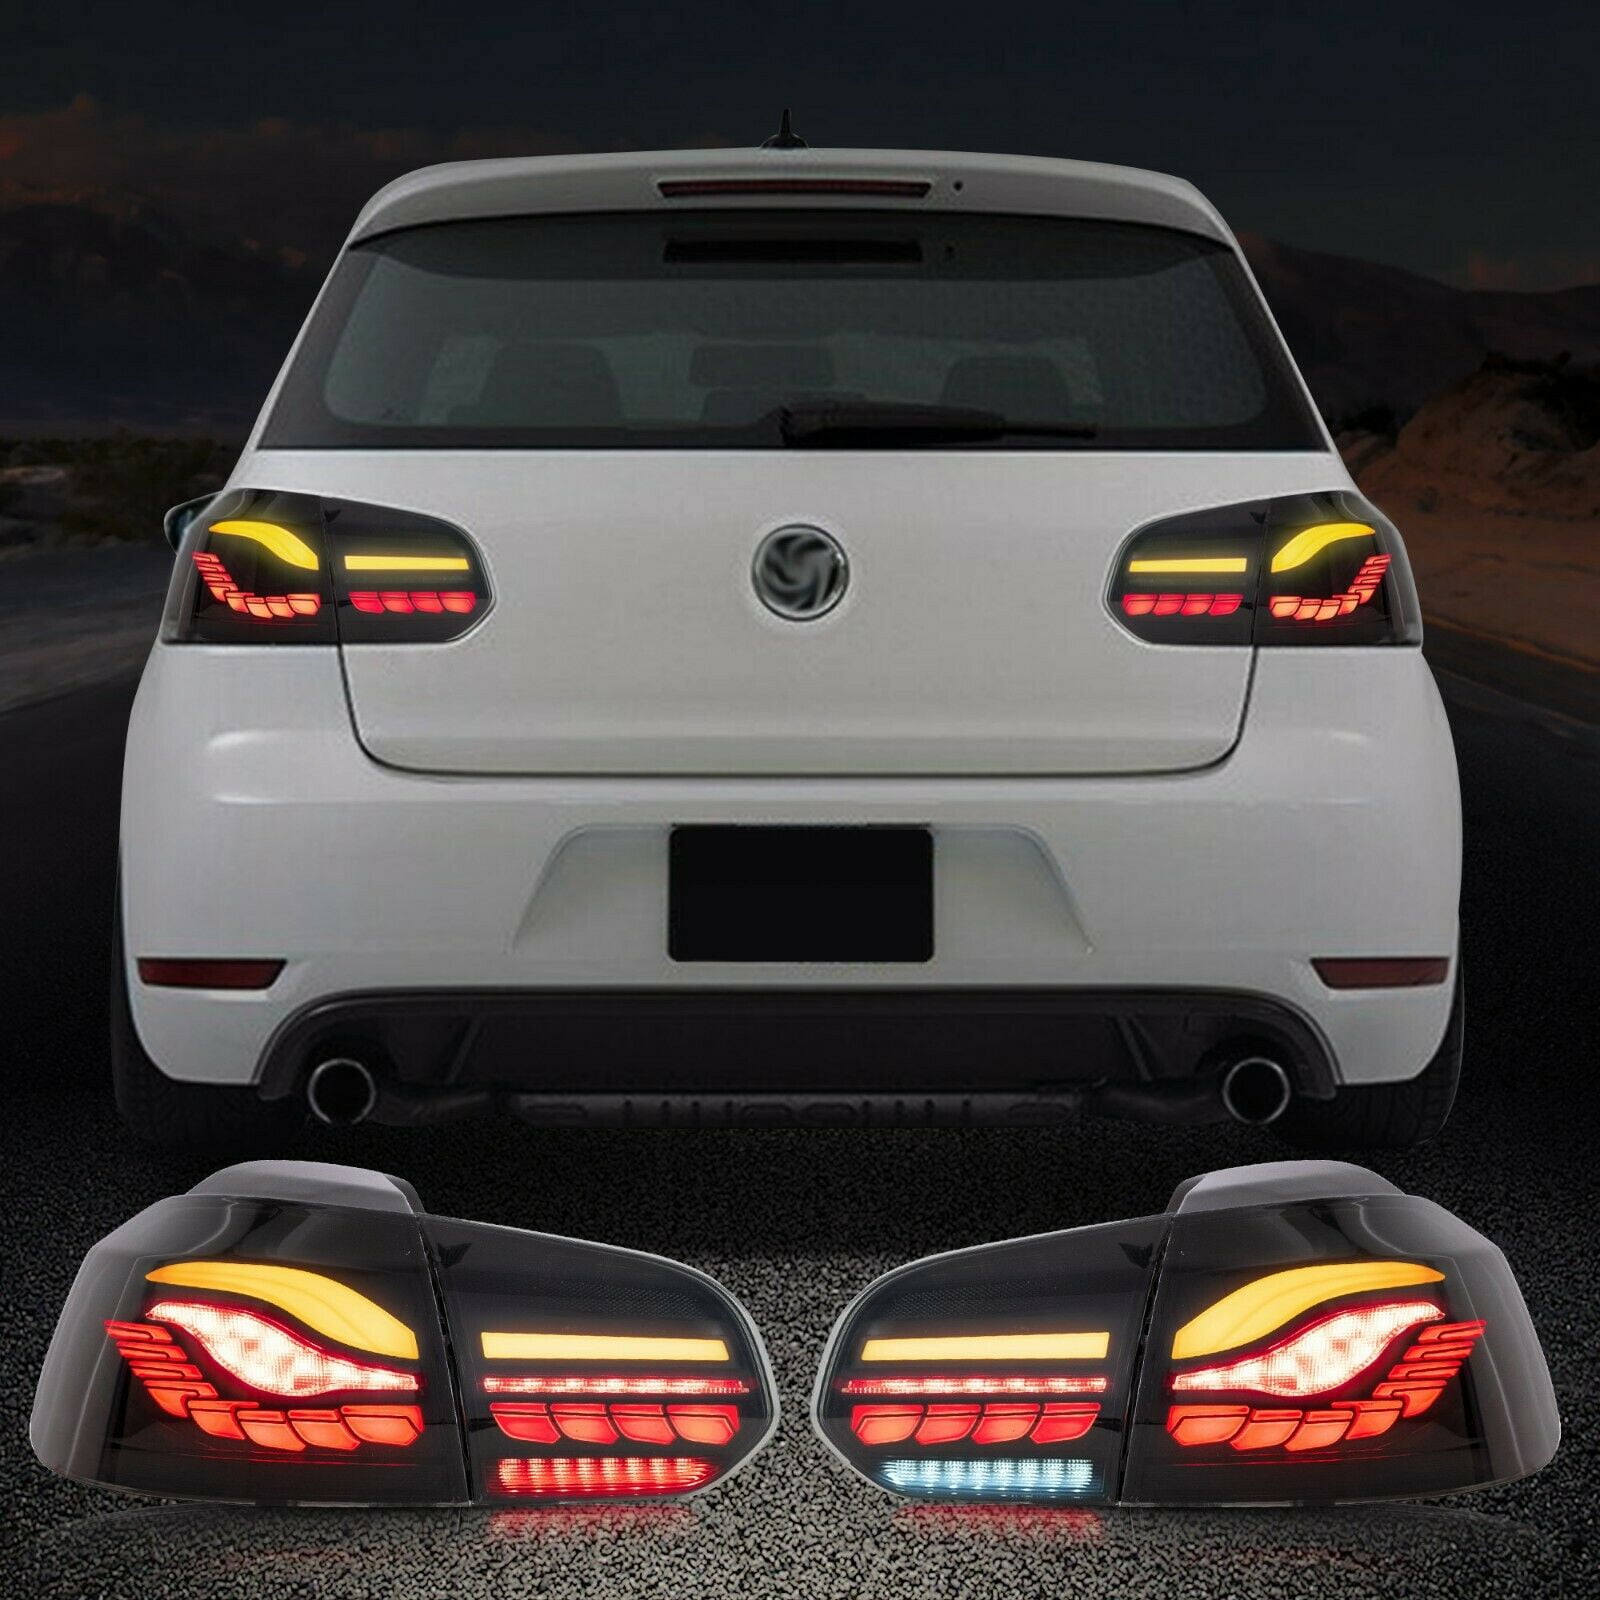  USR DEPO VW Golf 5 Tail Lights - Black/Smoke Rear Tail Lamps  Set (Left + Right, Inner + Outer) Compatible with 2006-2009 Volkswagen Golf  GTi Mk.5 Chassis (Smoked 4 Pieces) : Automotive